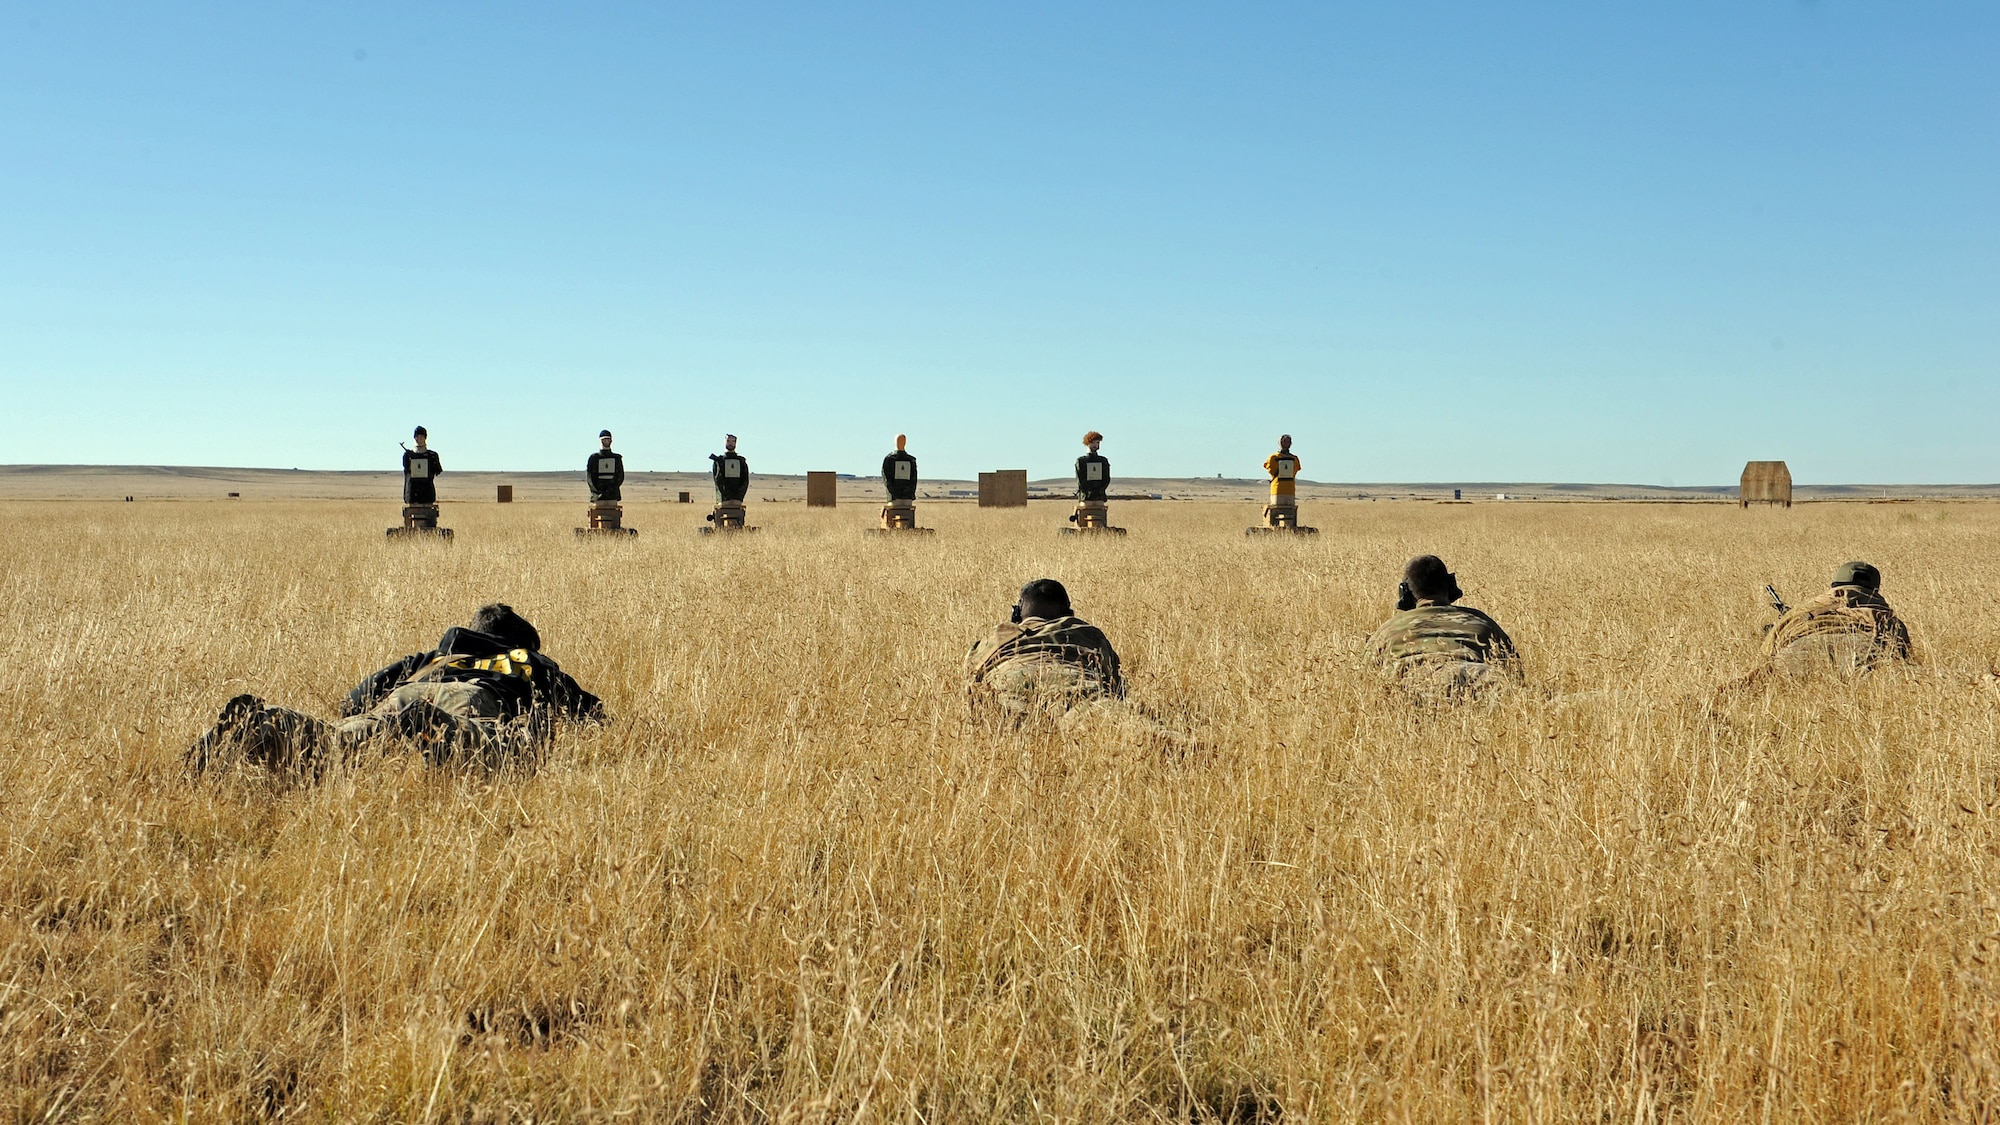 Members of the 27th Special Operations Civil Engineer Squadron Explosive Ordnance Disposal flight zero their weapons prior to conducting live fire training utilizing state-of-the-art Robotic Human Type Targets, Nov. 8, 2016, at Melrose Air Force Range, N.M. RHTT targets are autonomous and smart in nature, allowing for the creation of infinite realistic scenarios which call for Air Commandos to employ elevated tactical thought processes, and execute appropriate courses of action with real-time urgency. (U.S. Air Force photo by Staff Sgt. Whitney Amstutz/Released)